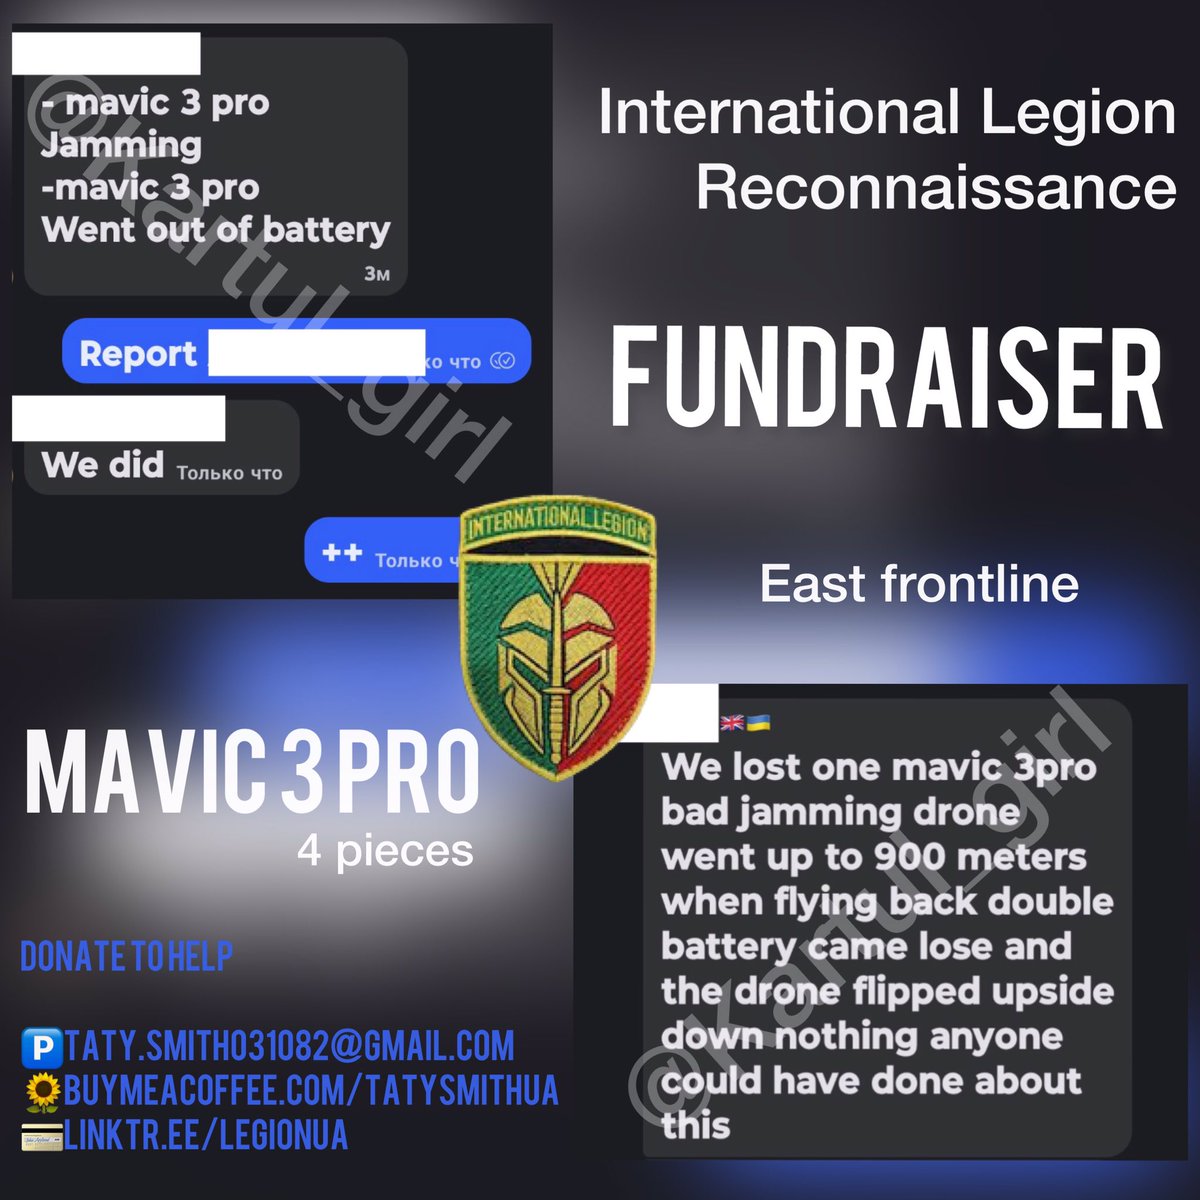 FUNDRAISER‼️DRONES EAST ZERO LINE Friends🇺🇦the collection is very slow🙏 🚨RT.QT.REPLY Essential to prevent the enemy from advancing ✅ $1466 Intl Legion Reconnaissance MAVIC 3 PRO *4pcs 🎯~$8300 🅿️taty.smith031082@gmail.com buymeacoffee.com/tatysmithUA linktr.ee/legionua